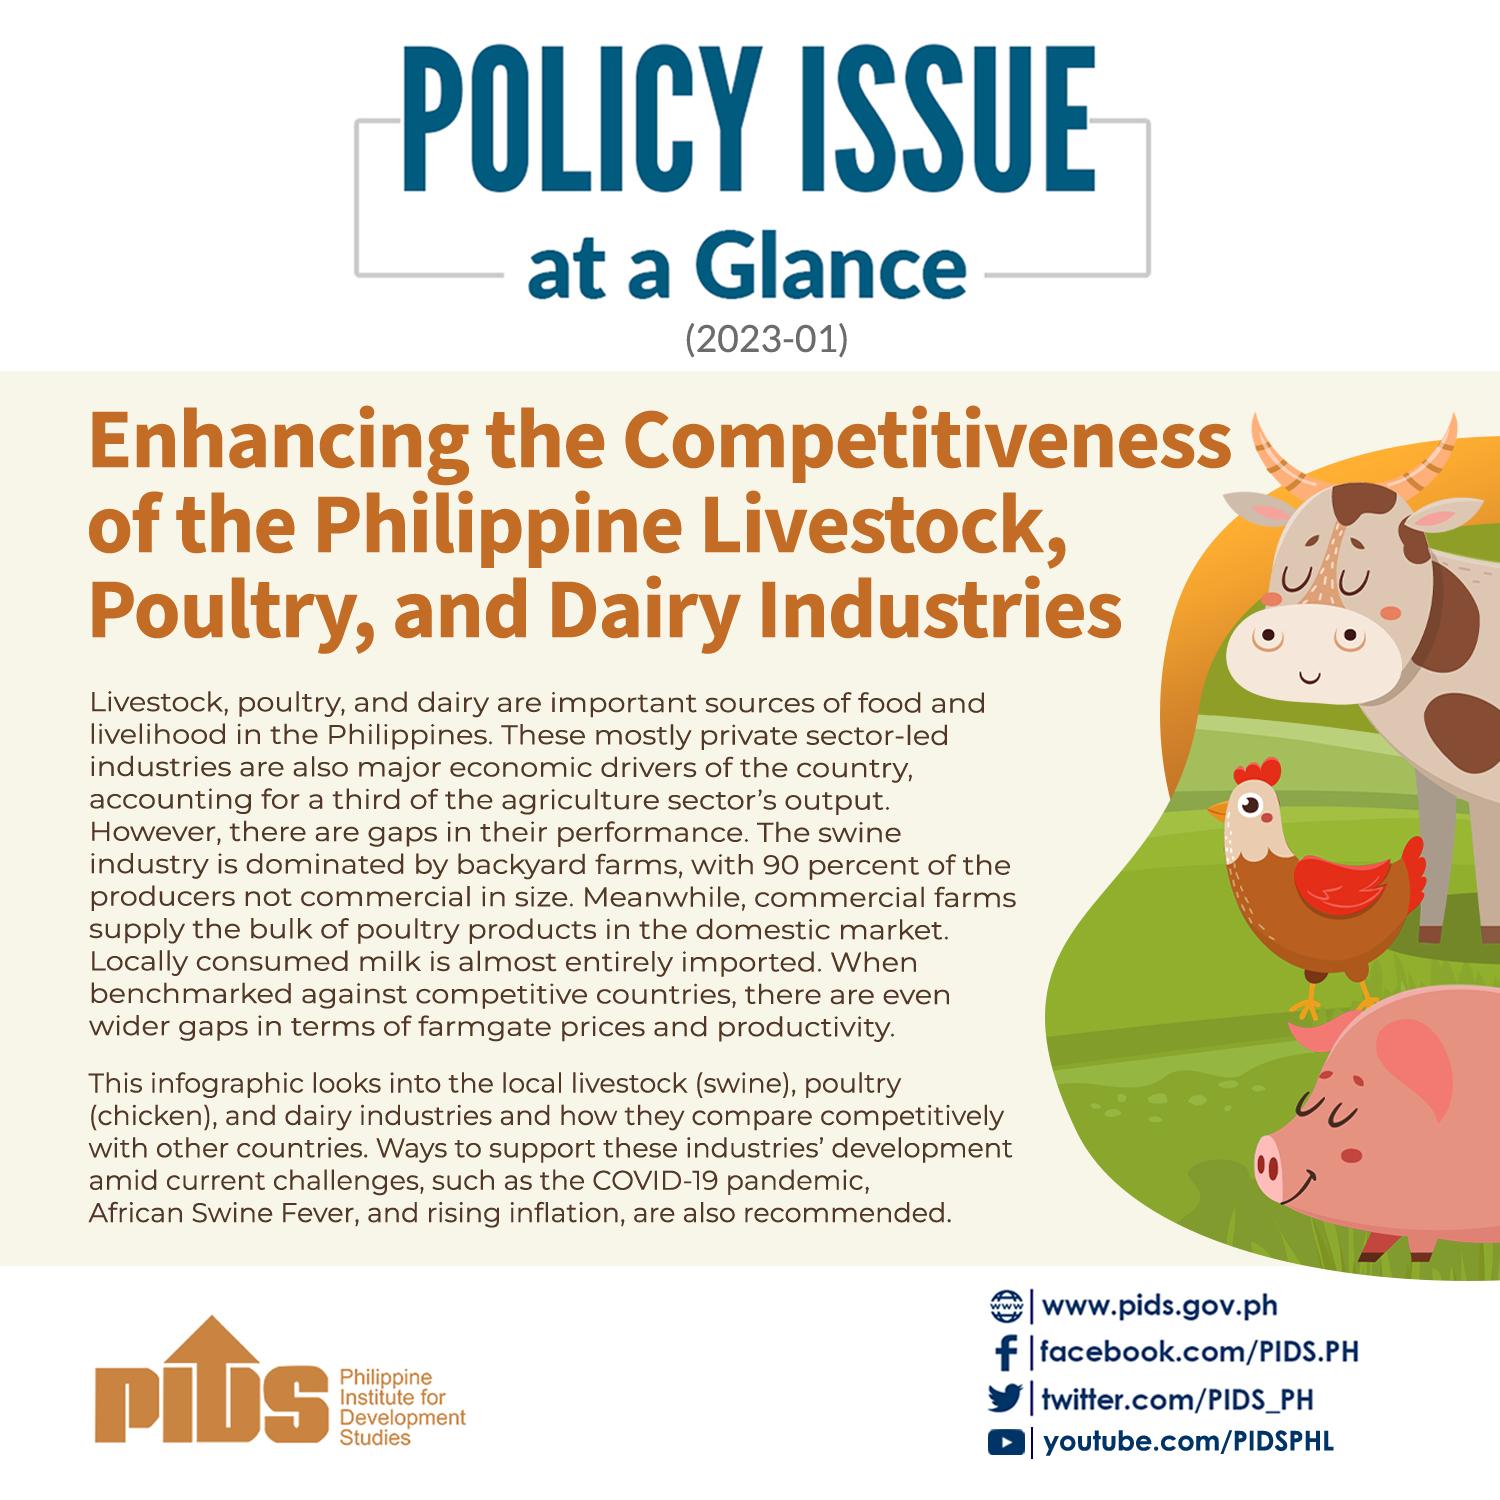 POLICY ISSUE AT A GLANCE: Enhancing the Competitiveness of the Philippine Livestock, Poultry, and Dairy Industries-PIAAG_January28_1.jpg